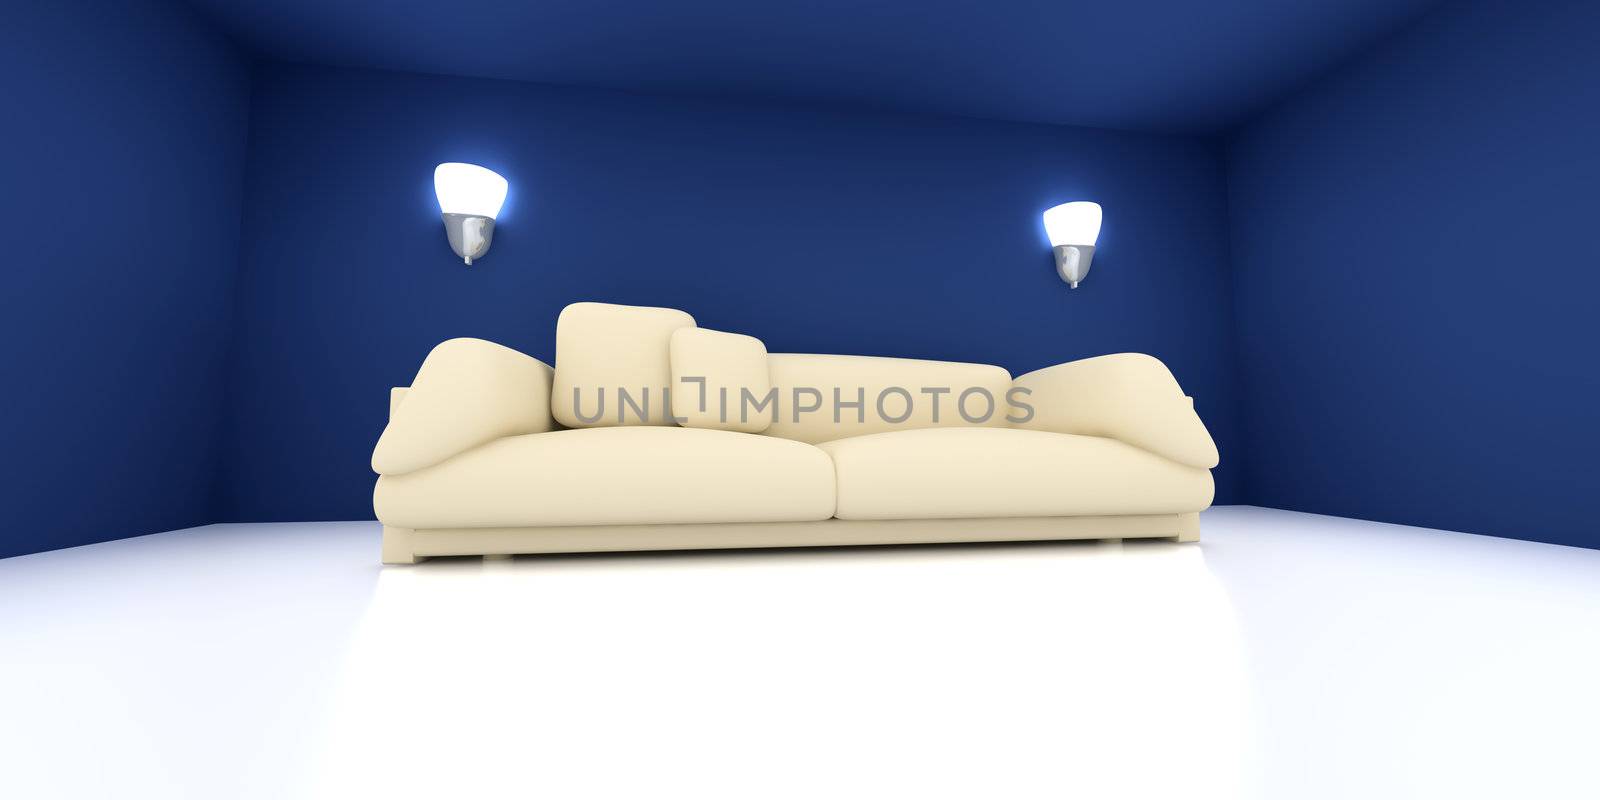 3D rendered Interior. A Sofa in a blue room. 